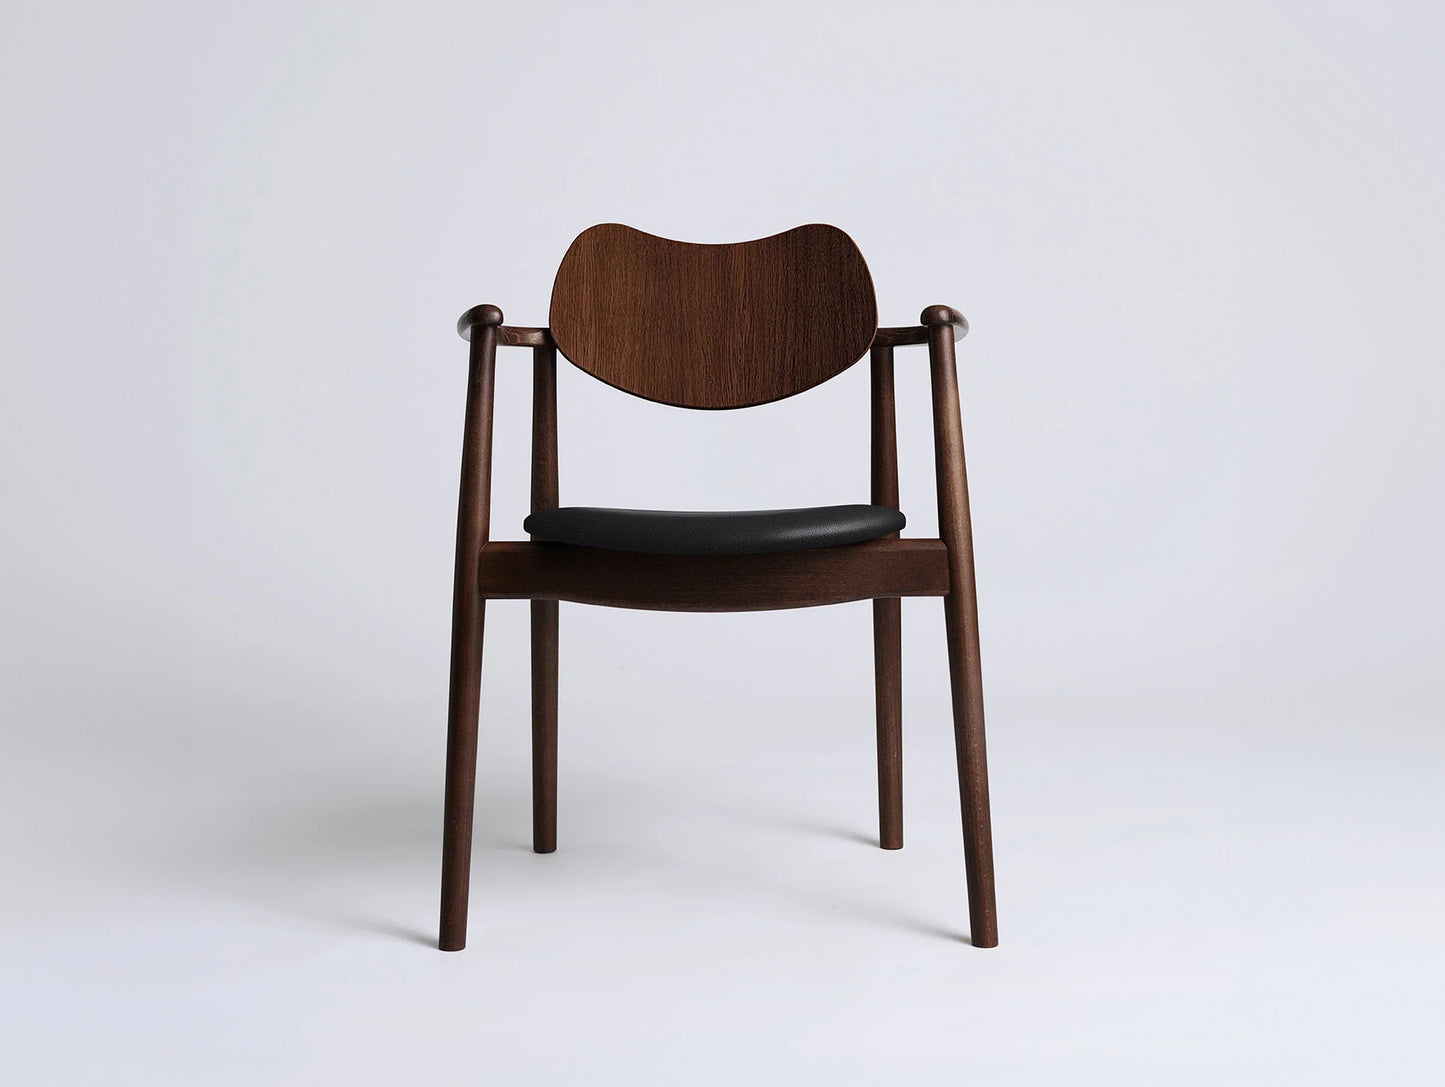 Regatta Chair Seat Upholstered by Ro Collection - Walnut Stained Beech / Exclusive Black Leather